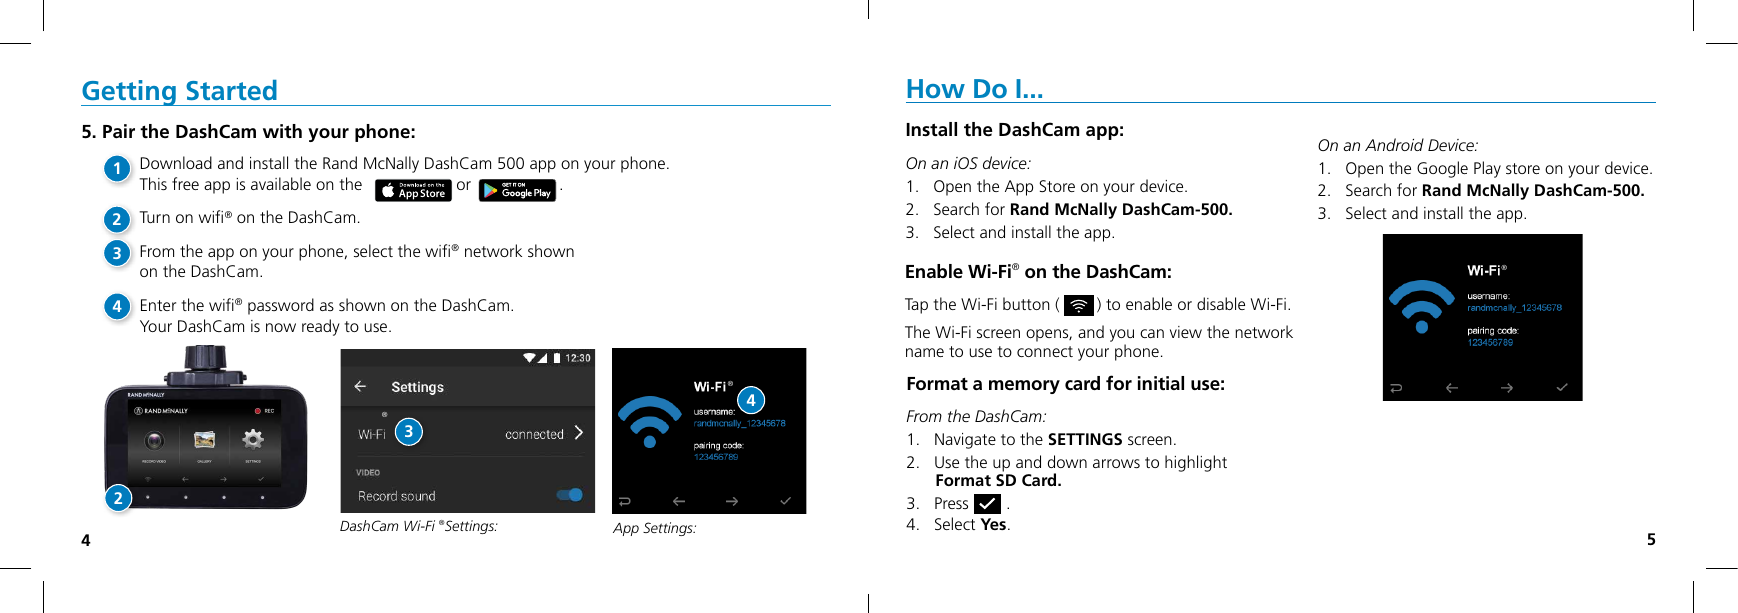 45DashCam Wi-Fi ®Settings: Getting Started5. Pair the DashCam with your phone:Download and install the Rand McNally DashCam 500 app on your phone.  This free app is available on the     or                   .Turn on wiﬁ® on the DashCam.From the app on your phone, select the wiﬁ® network shown  on the DashCam.Enter the wiﬁ® password as shown on the DashCam.Your DashCam is now ready to use.How Do I...Install the DashCam app:On an iOS device: 1.   Open the App Store on your device.2.   Search for Rand McNally DashCam-500.3.   Select and install the app.   On an Android Device: 1.   Open the Google Play store on your device. 2.   Search for Rand McNally DashCam-500. 3.   Select and install the app. Format a memory card for initial use:From the DashCam: 1.   Navigate to the SETTINGS screen.2.   Use the up and down arrows to highlight  Format SD Card.3.   Press        .4.   Select Yes.®Enable Wi-Fi® on the DashCam:Tap the Wi-Fi button (        ) to enable or disable Wi-Fi.The Wi-Fi screen opens, and you can view the network  name to use to connect your phone.®3App Settings:®421234